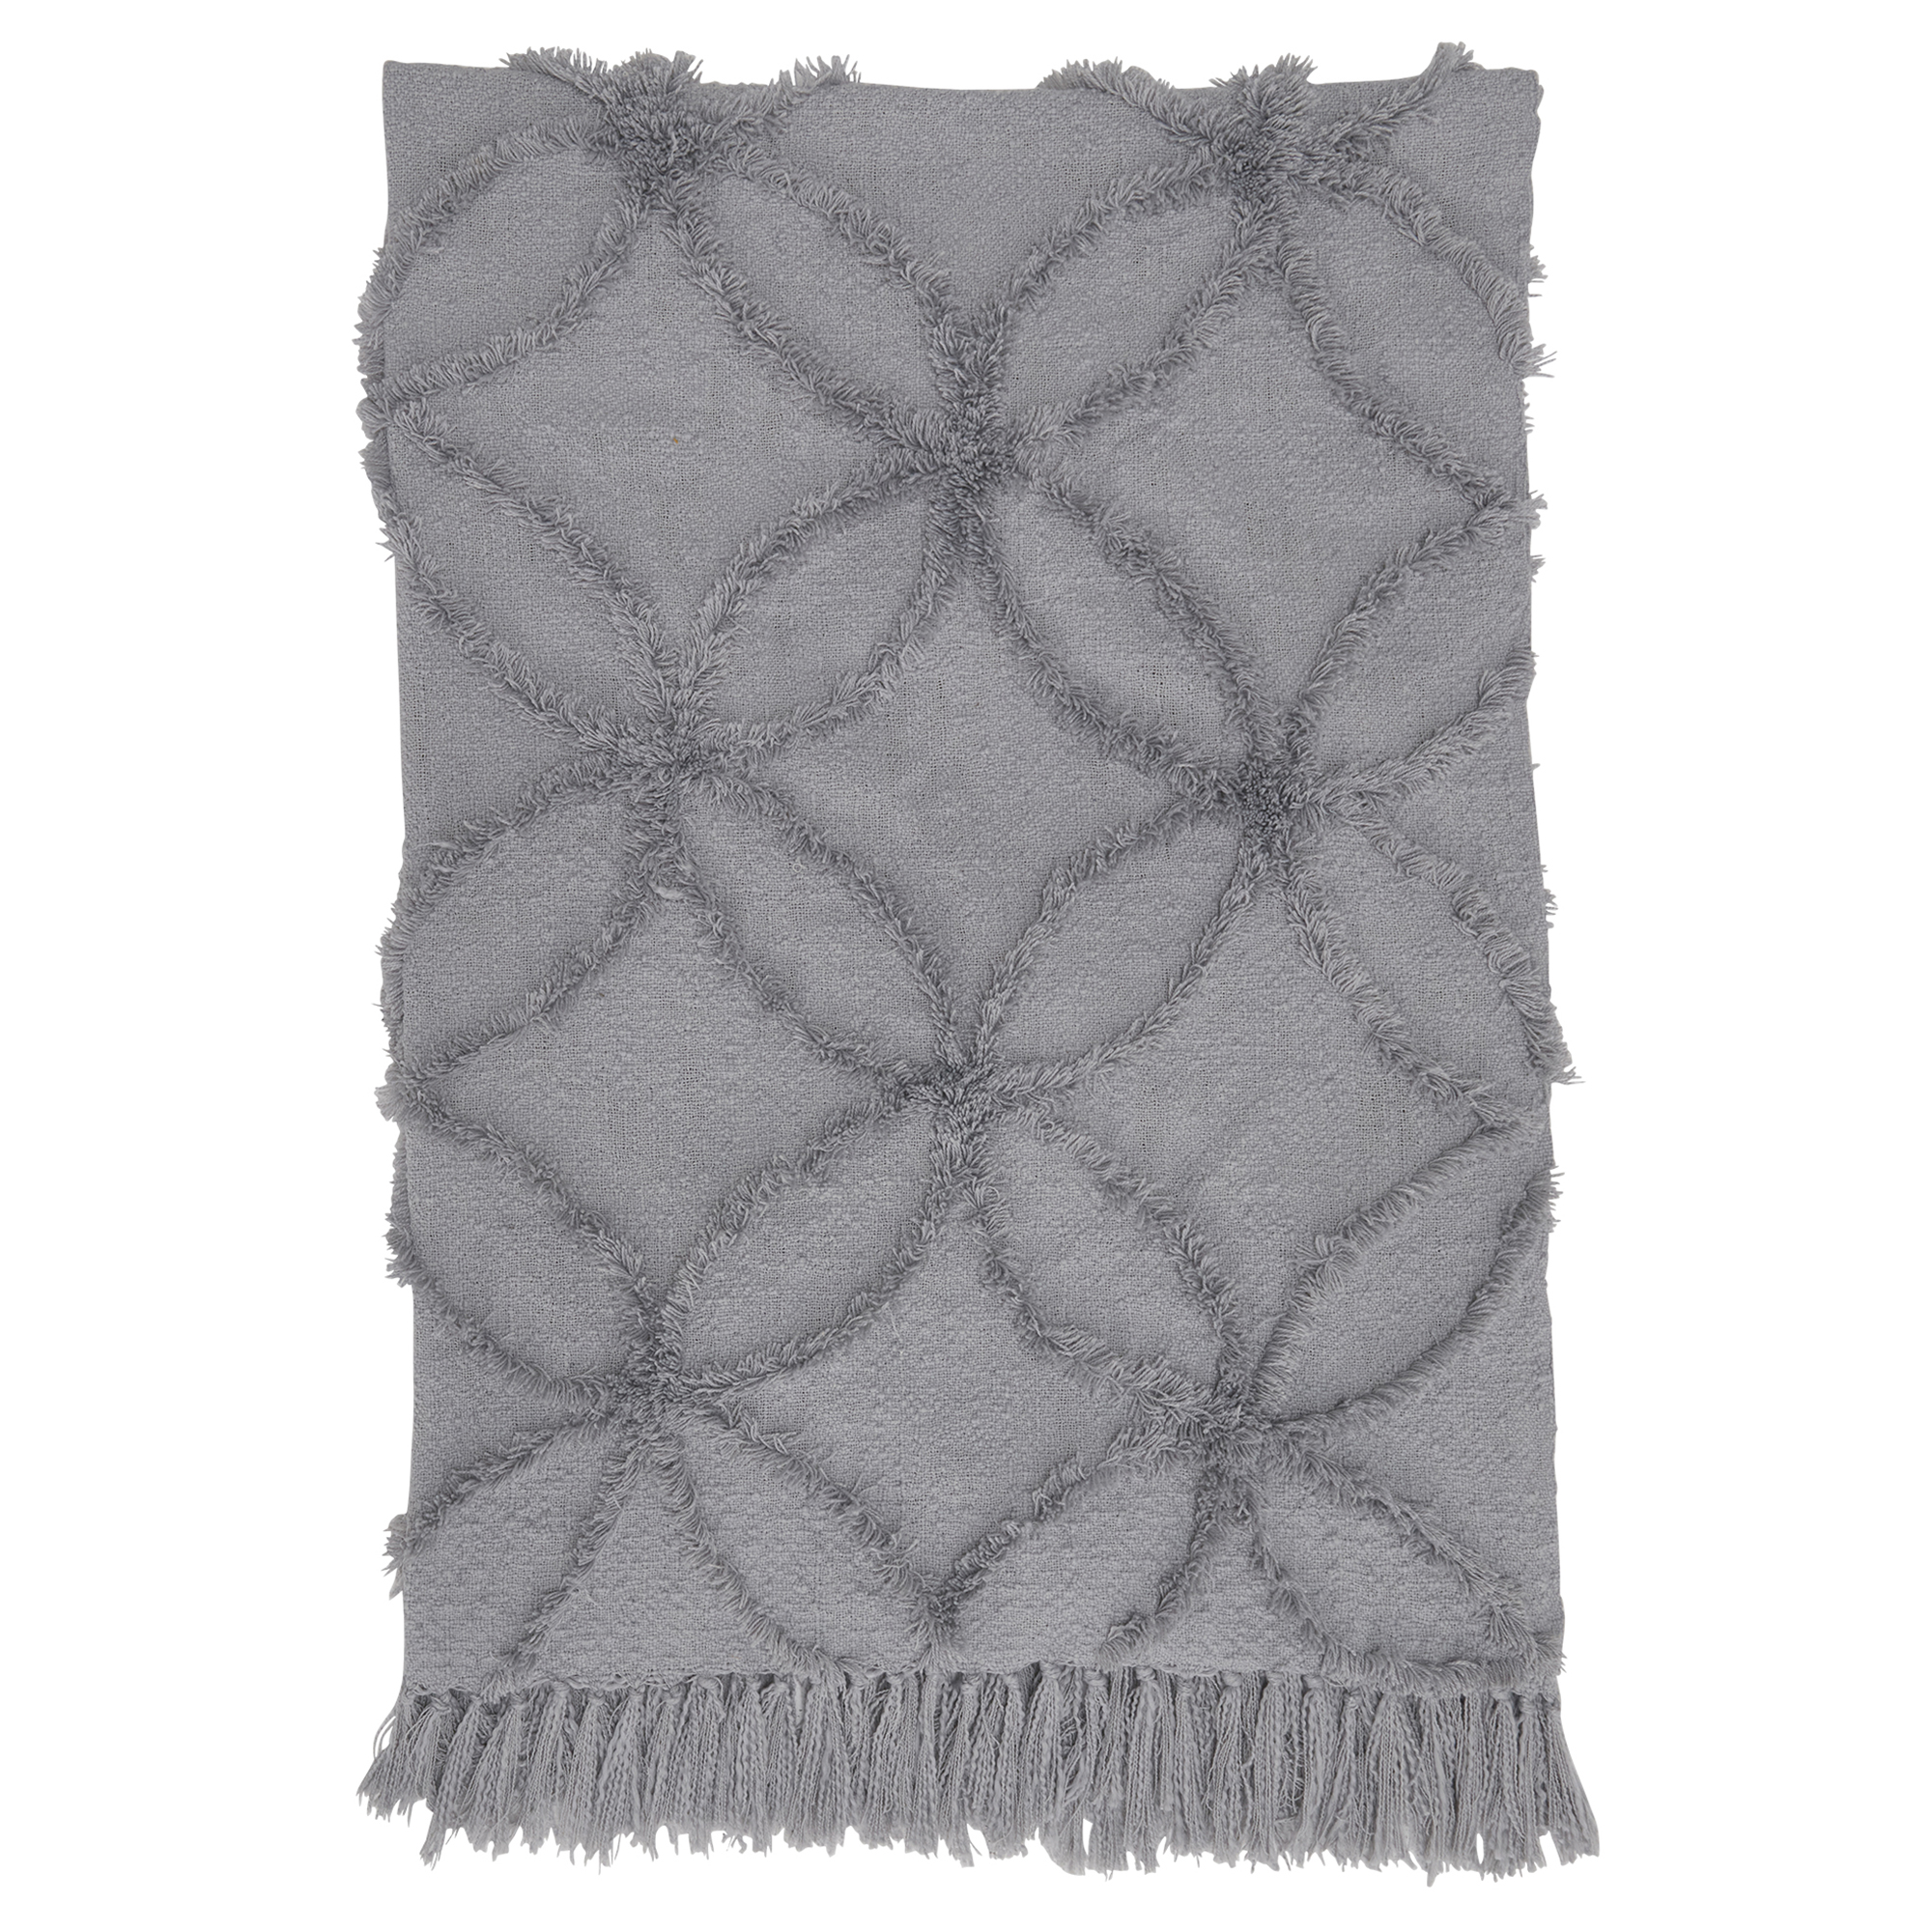 Flora Grey Recycled Plastic Throw Blanket | Barker & Stonehouse